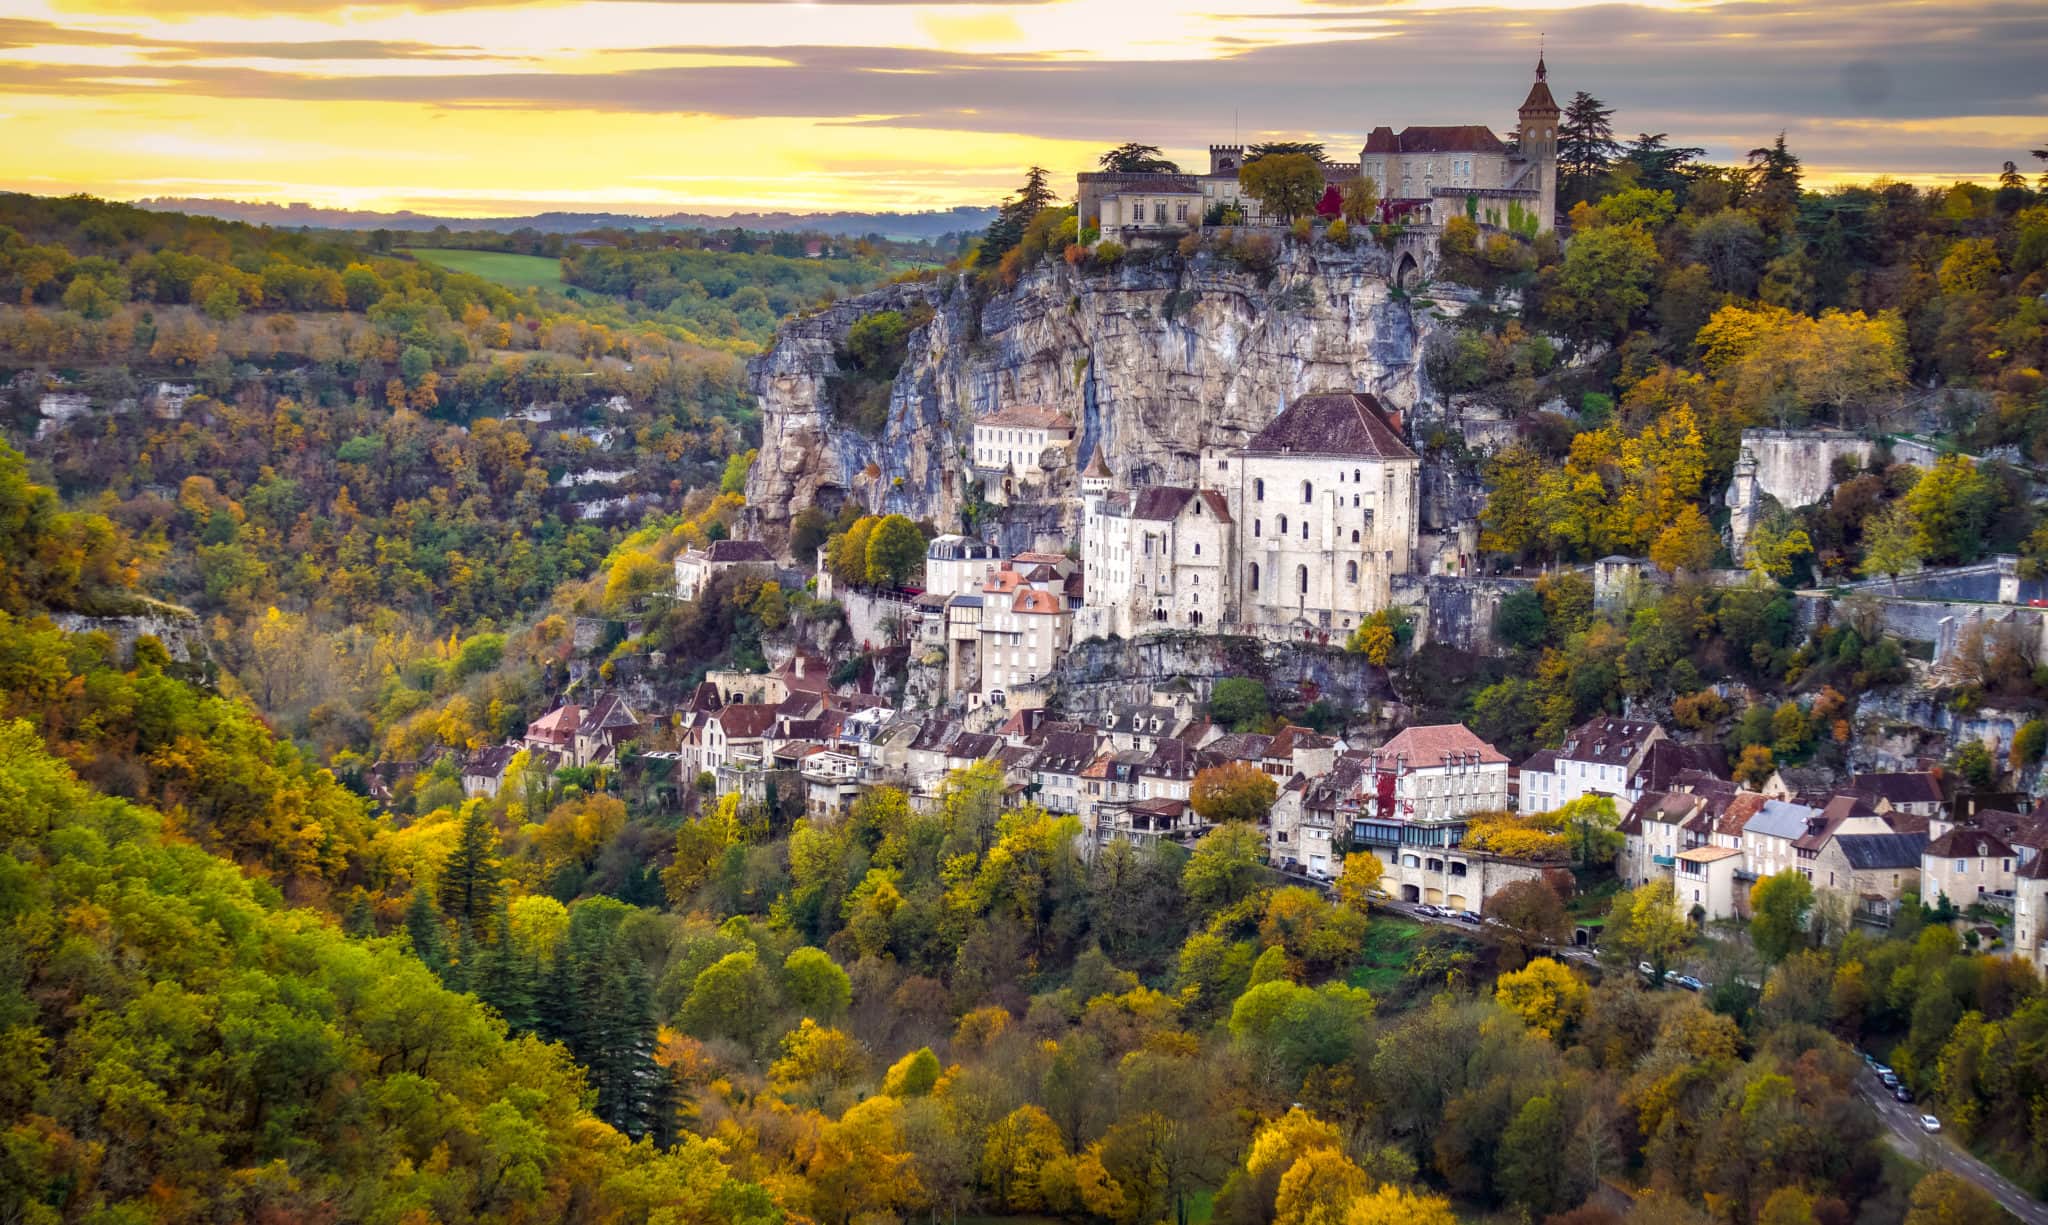 The Dordogne village of Rocamadour from a distance, perched on the rocky hill.